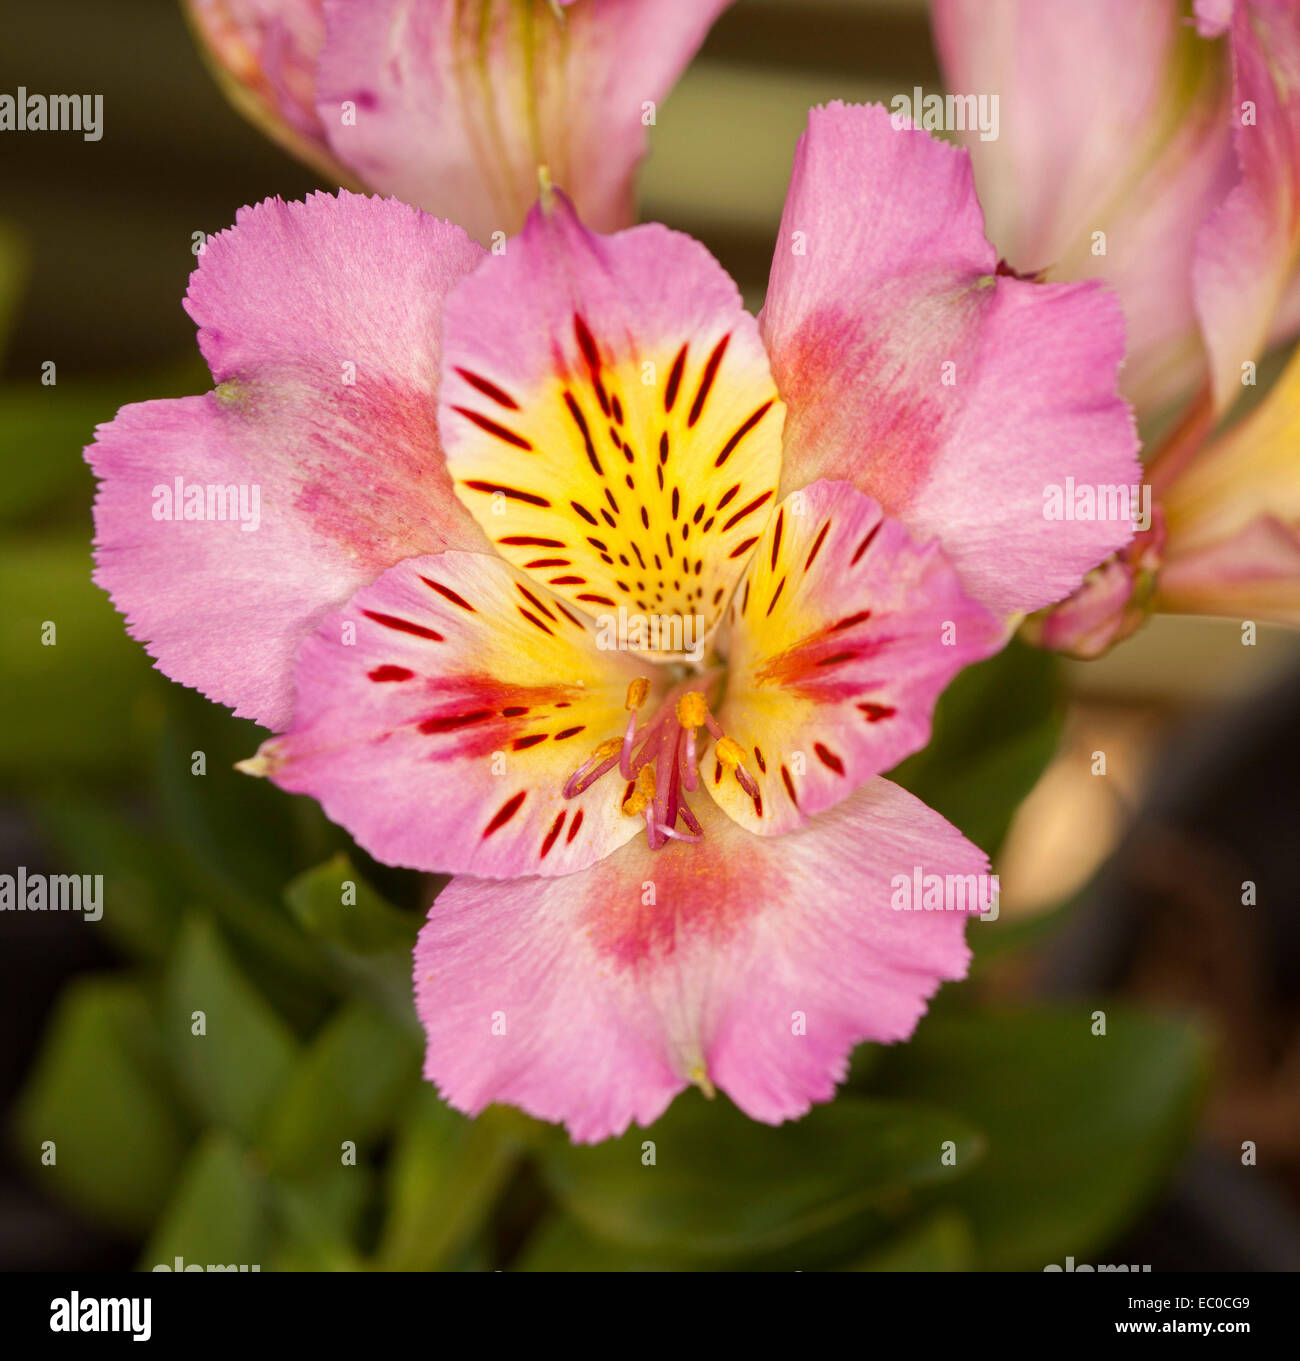 Spectacular bright pink Alstroemeria flower with yellow throat & red & brown streaks against background of dark green foliage Stock Photo